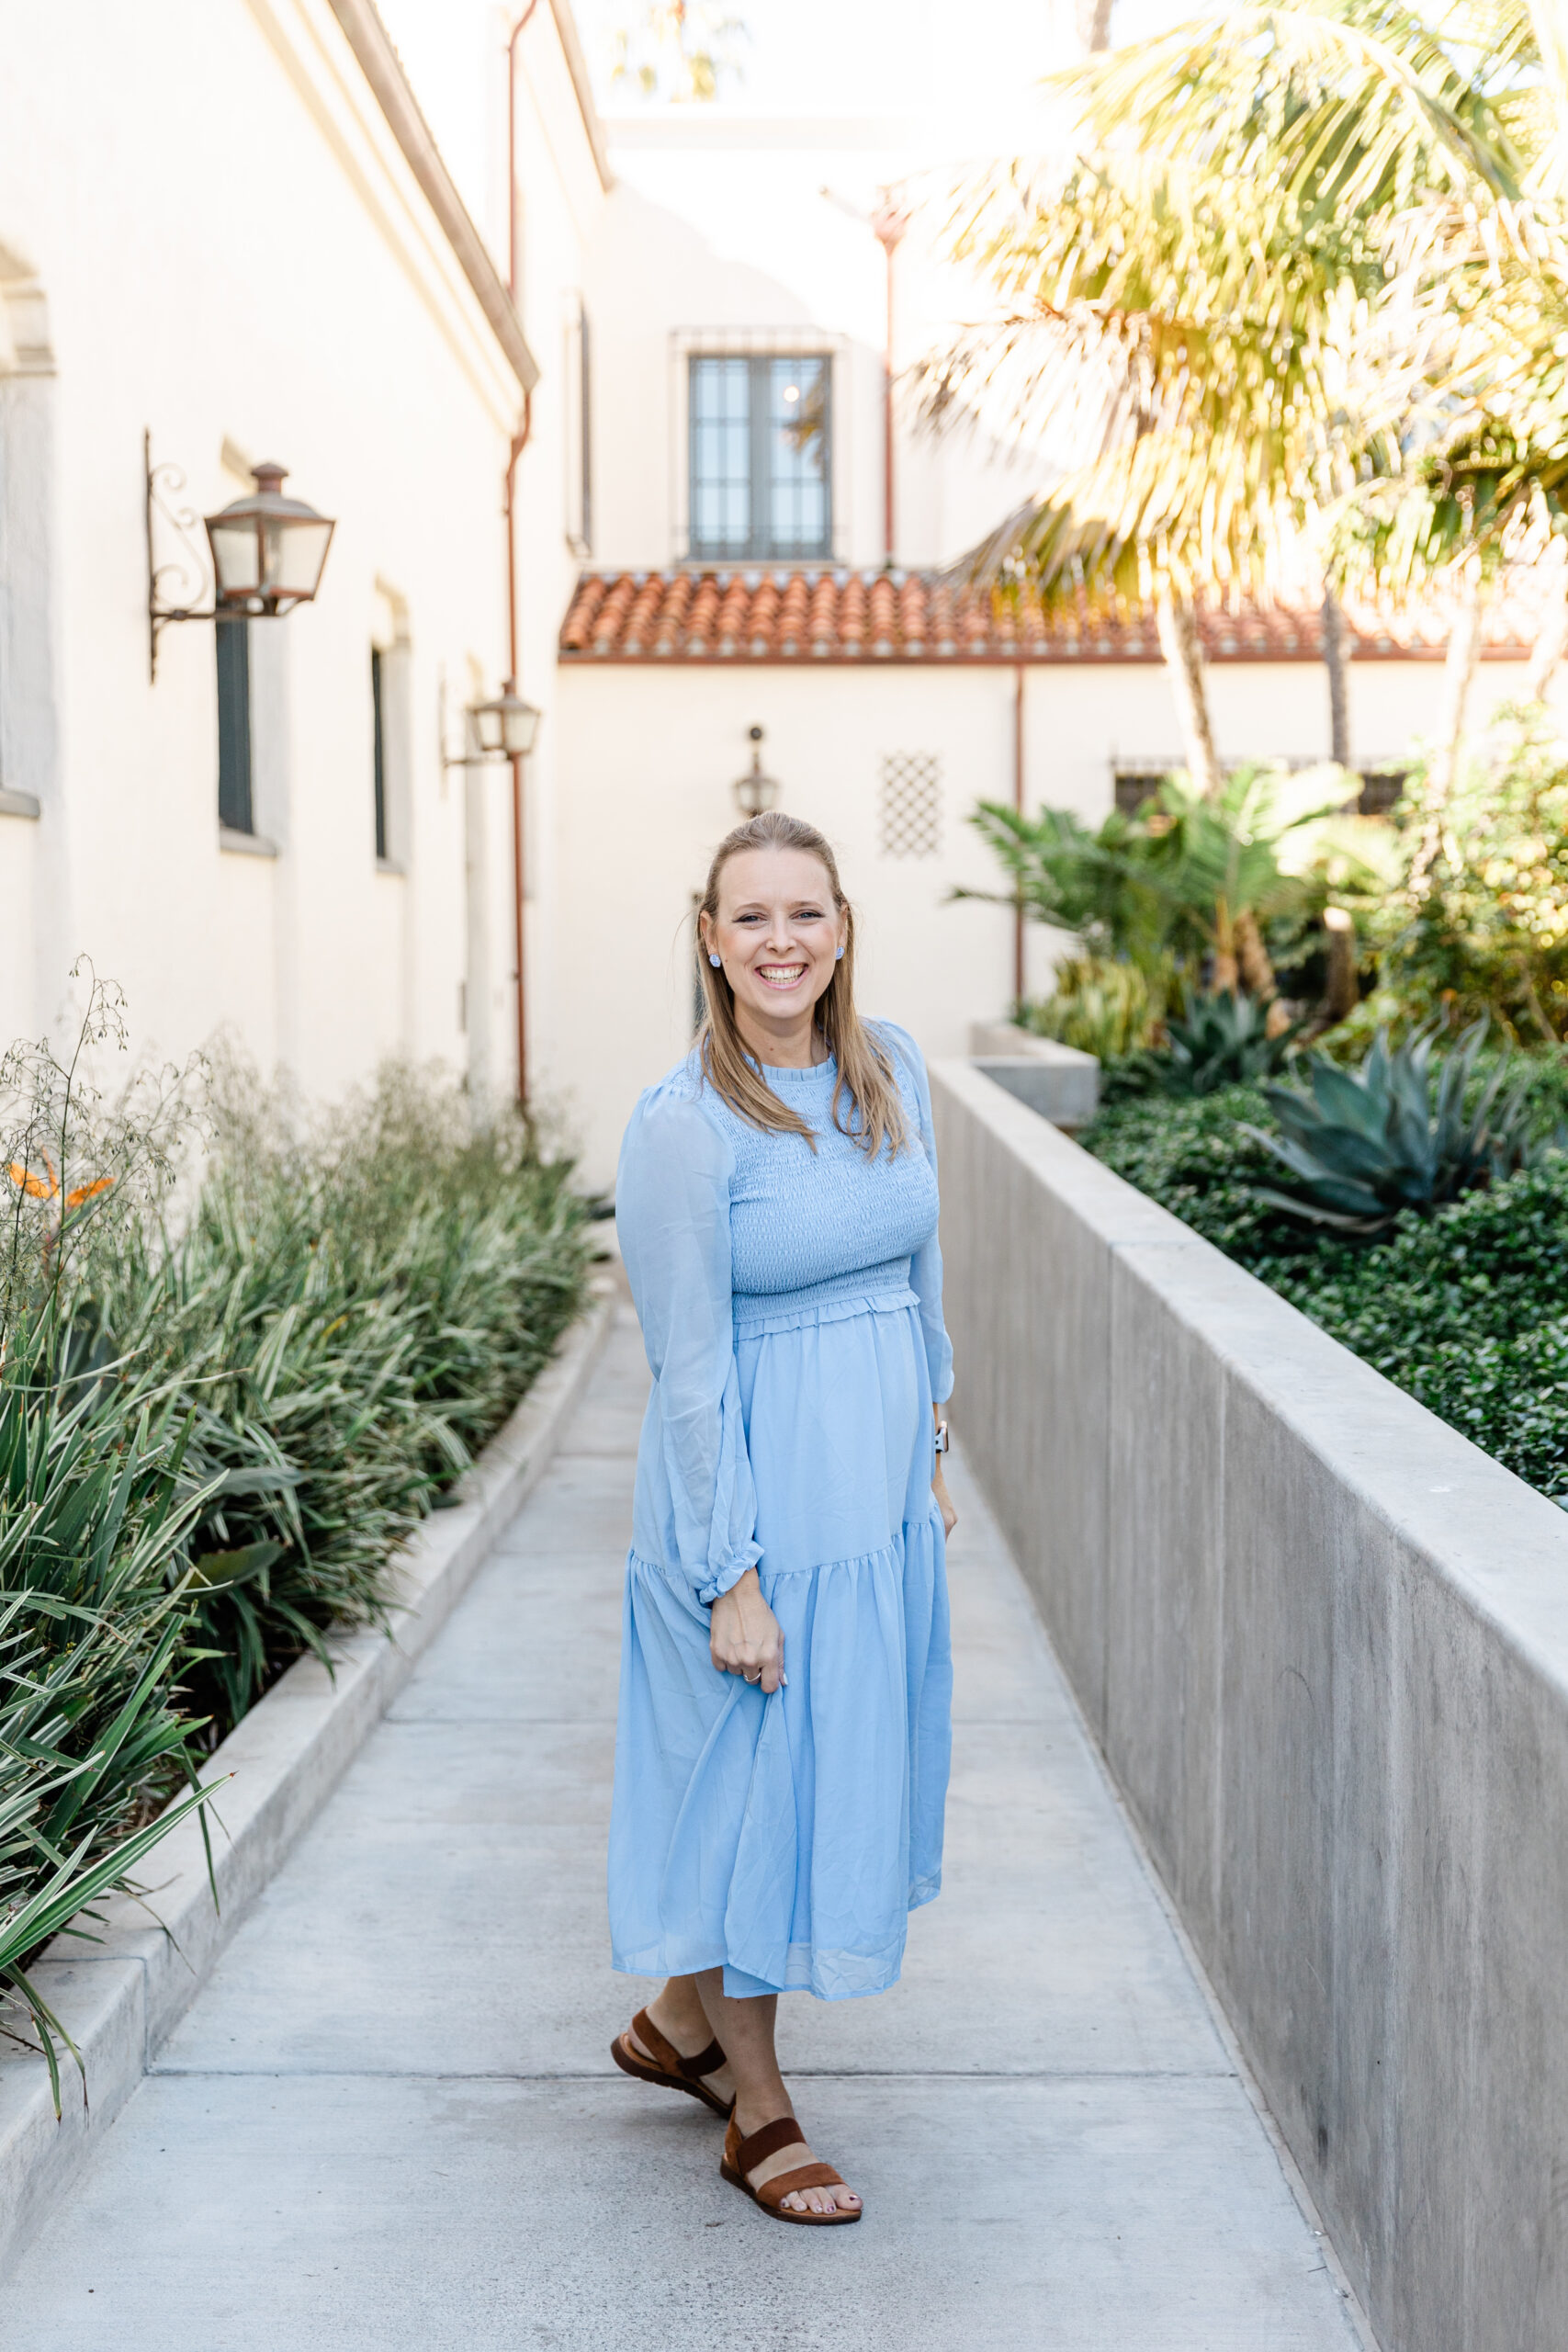 Ashley owner of Heirlooms and Lace Studios in a blue dress outside a wedding venue in Santa Barbara California